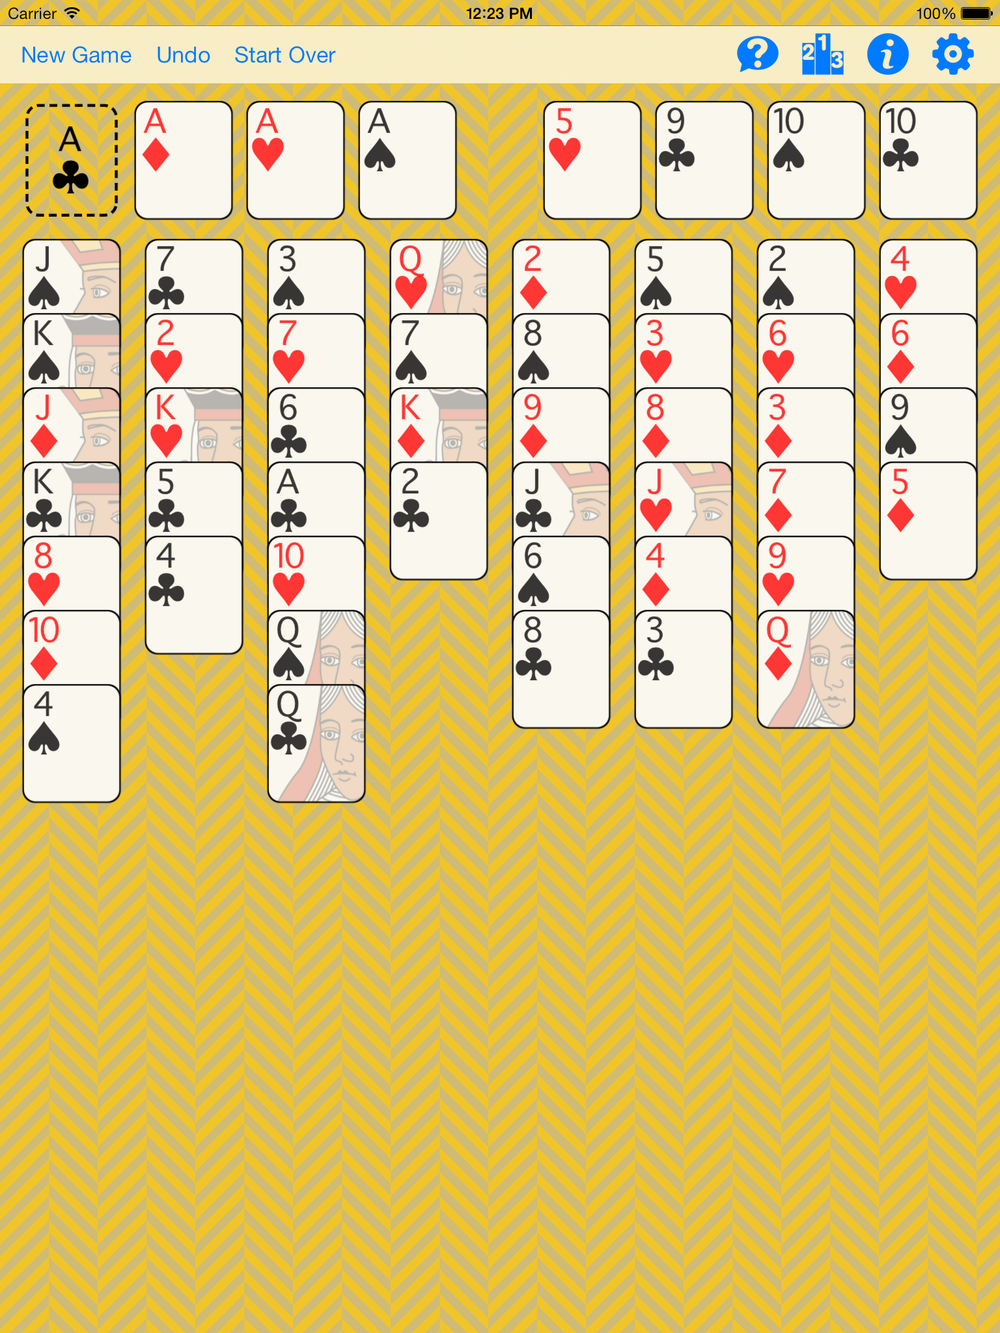 FreeCell — Apps for education, entertainment and accessibility